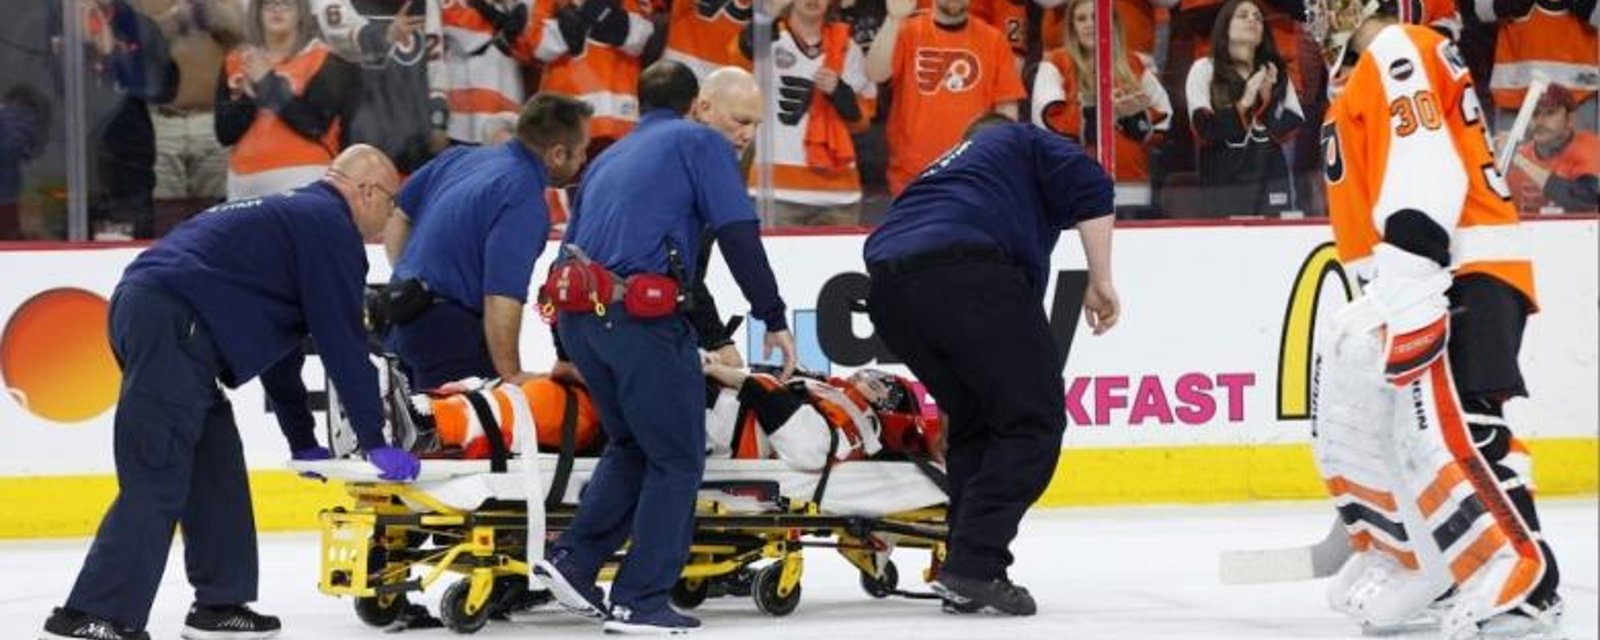 Player stretchered off the ice and sent to hospital after violent hit.